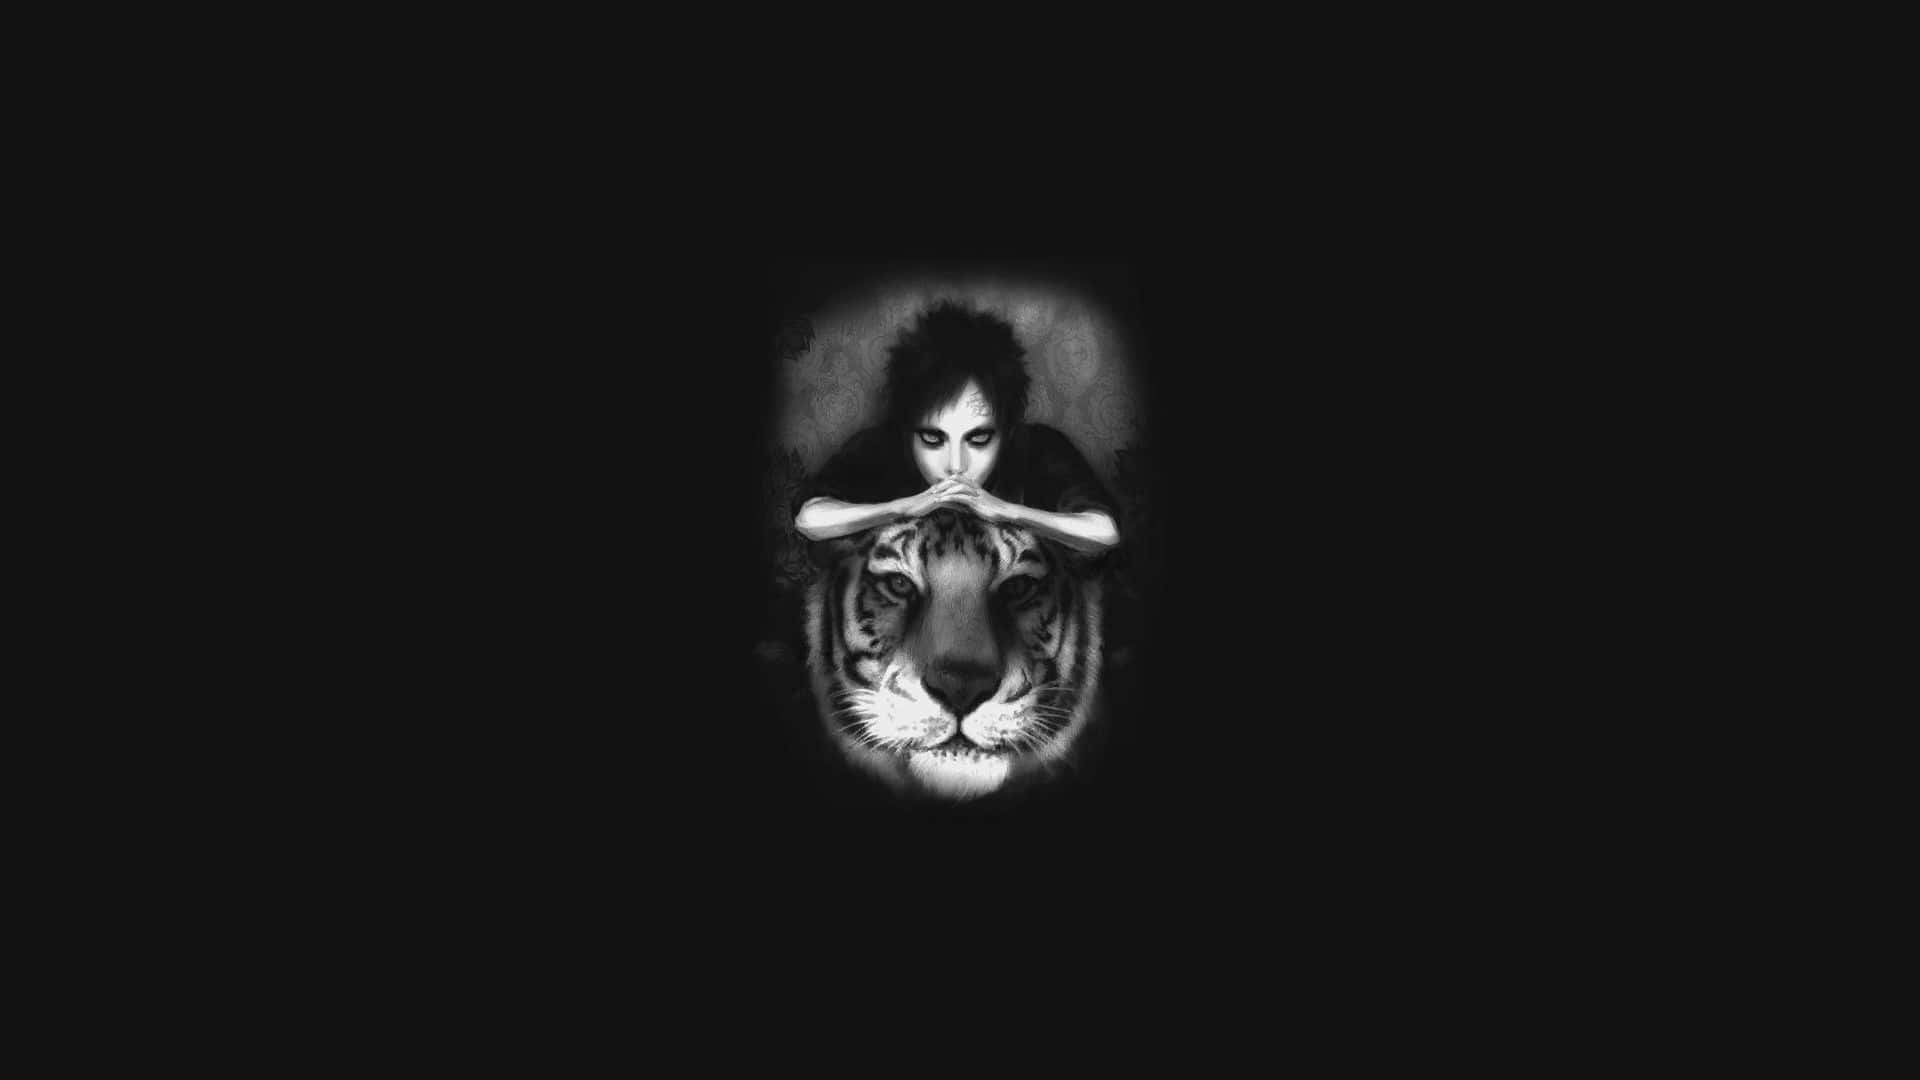 A Woman Is Sitting On A Tiger's Head